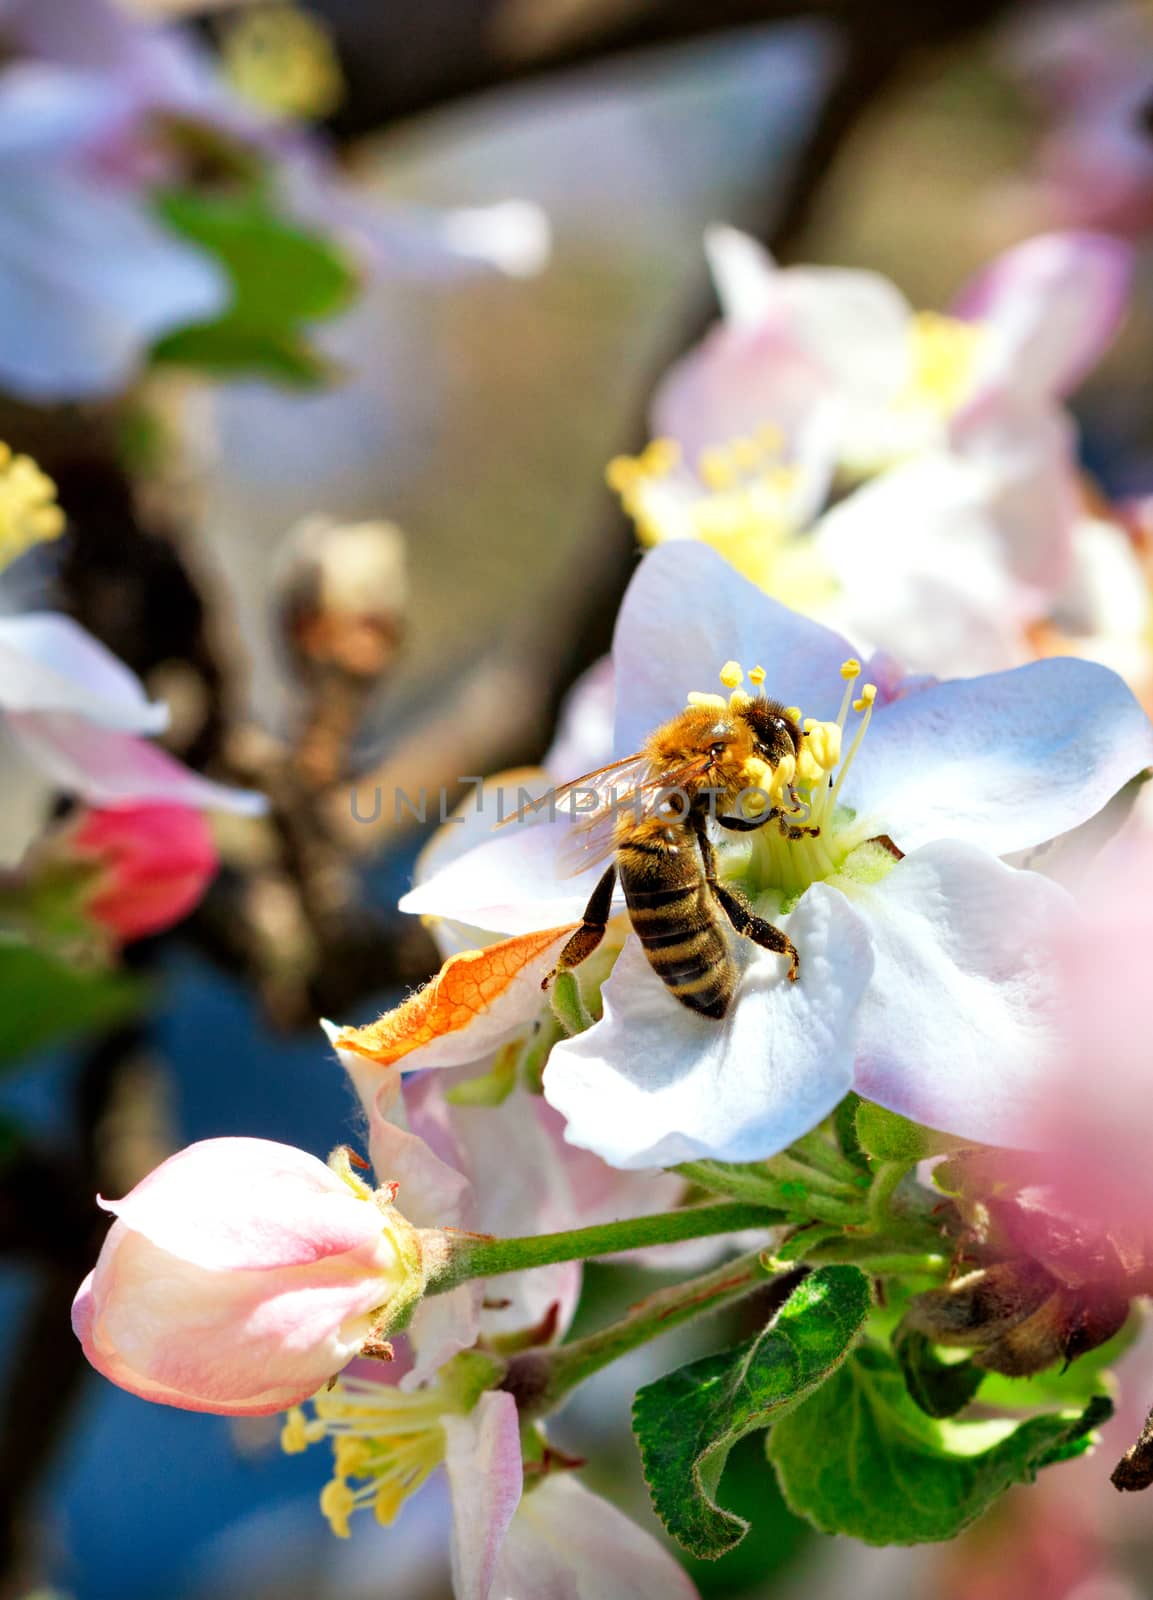 A hardworking bee sits on a blossoming apple tree flower and collects nectar and pollen in the sunshine against a background of a blossoming spring garden in blur, closeup.